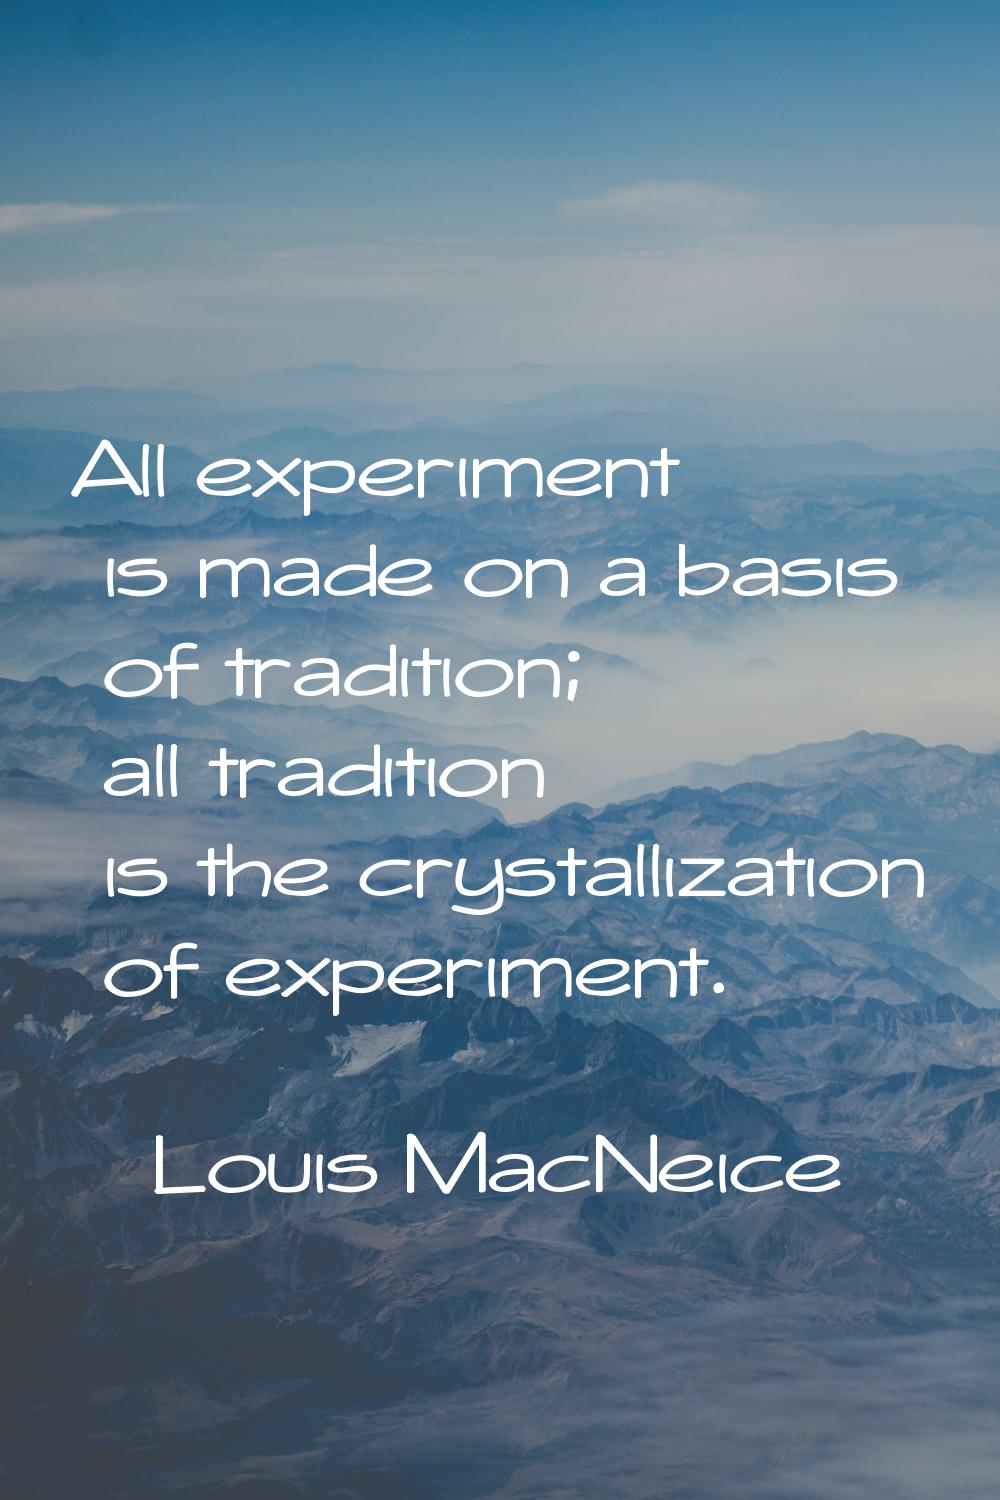 All experiment is made on a basis of tradition; all tradition is the crystallization of experiment.